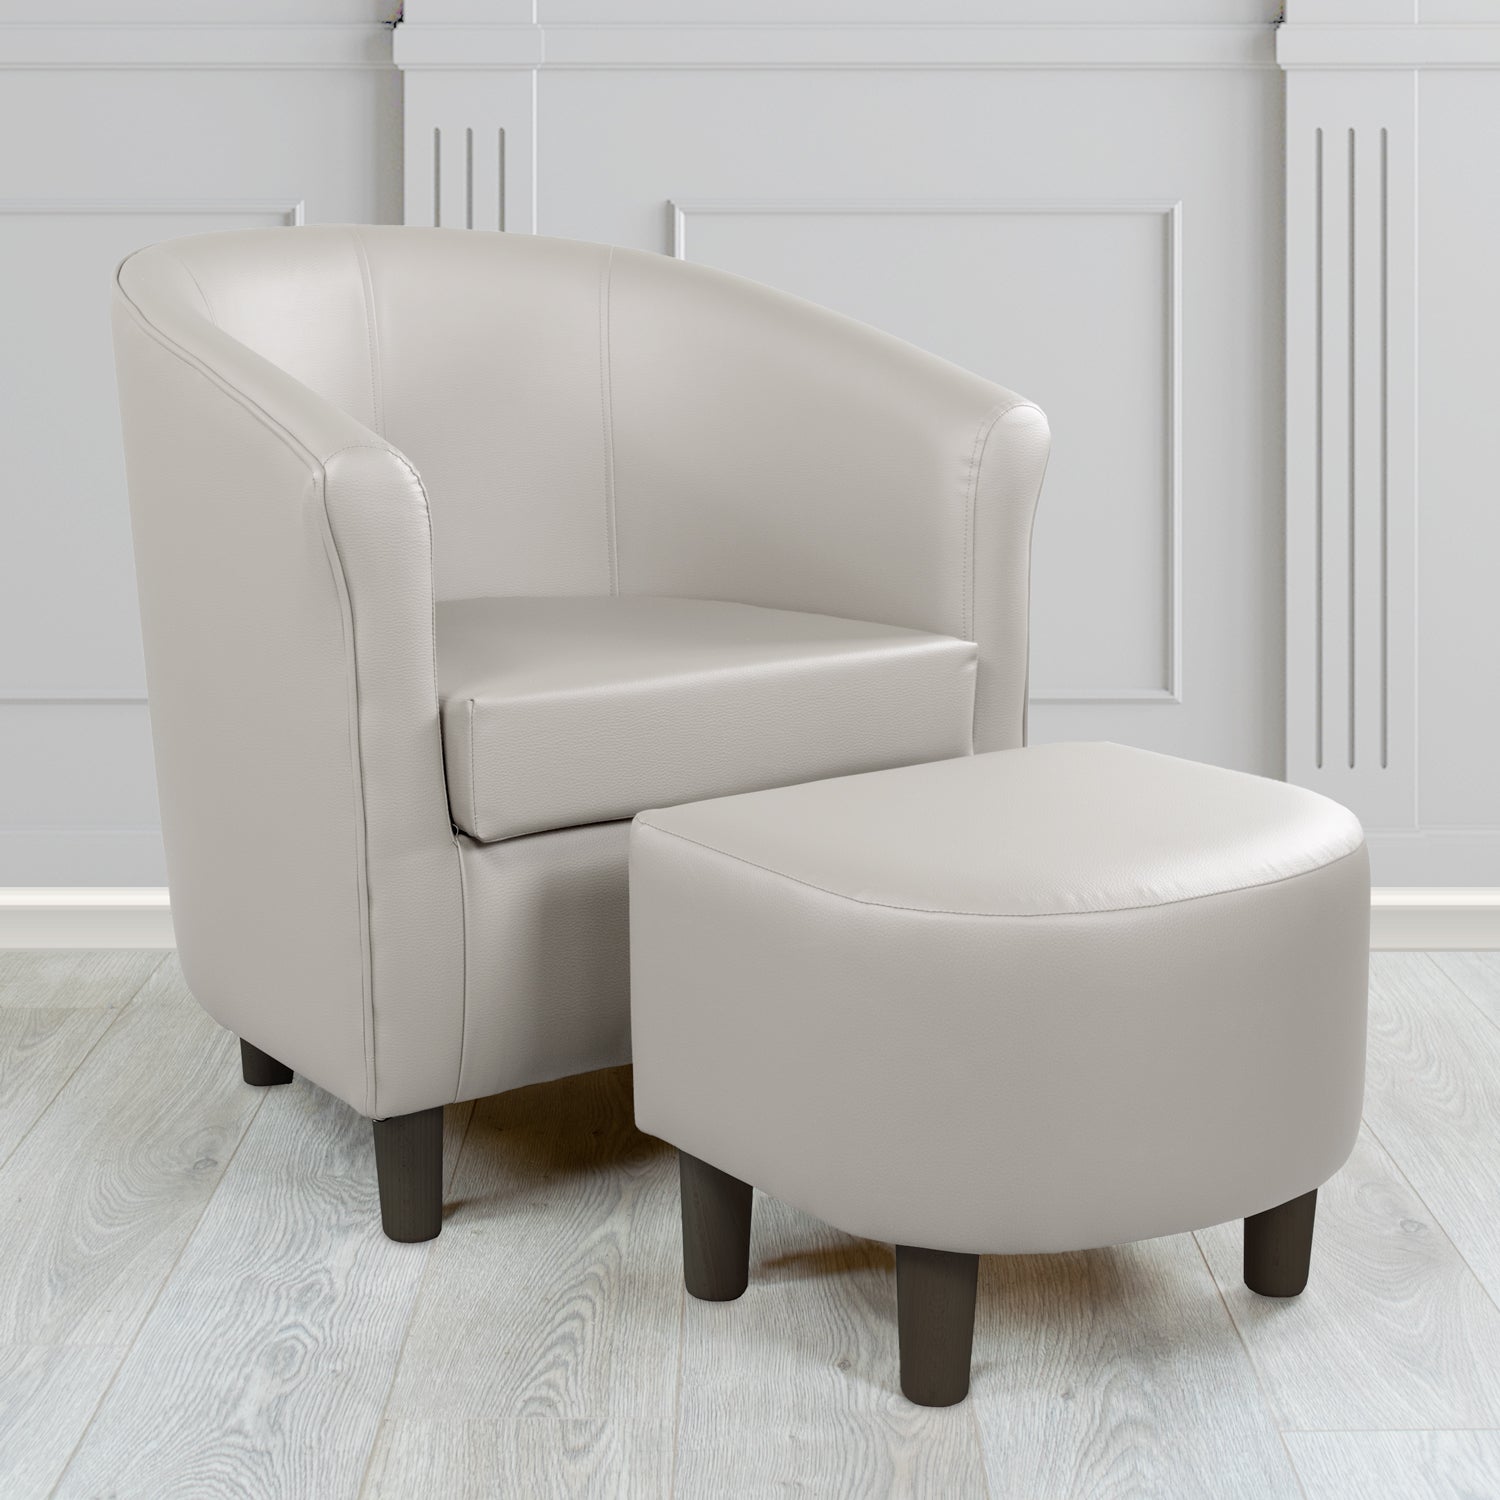 Tuscany Just Colour Putty Faux Leather Tub Chair with Footstool Set - The Tub Chair Shop